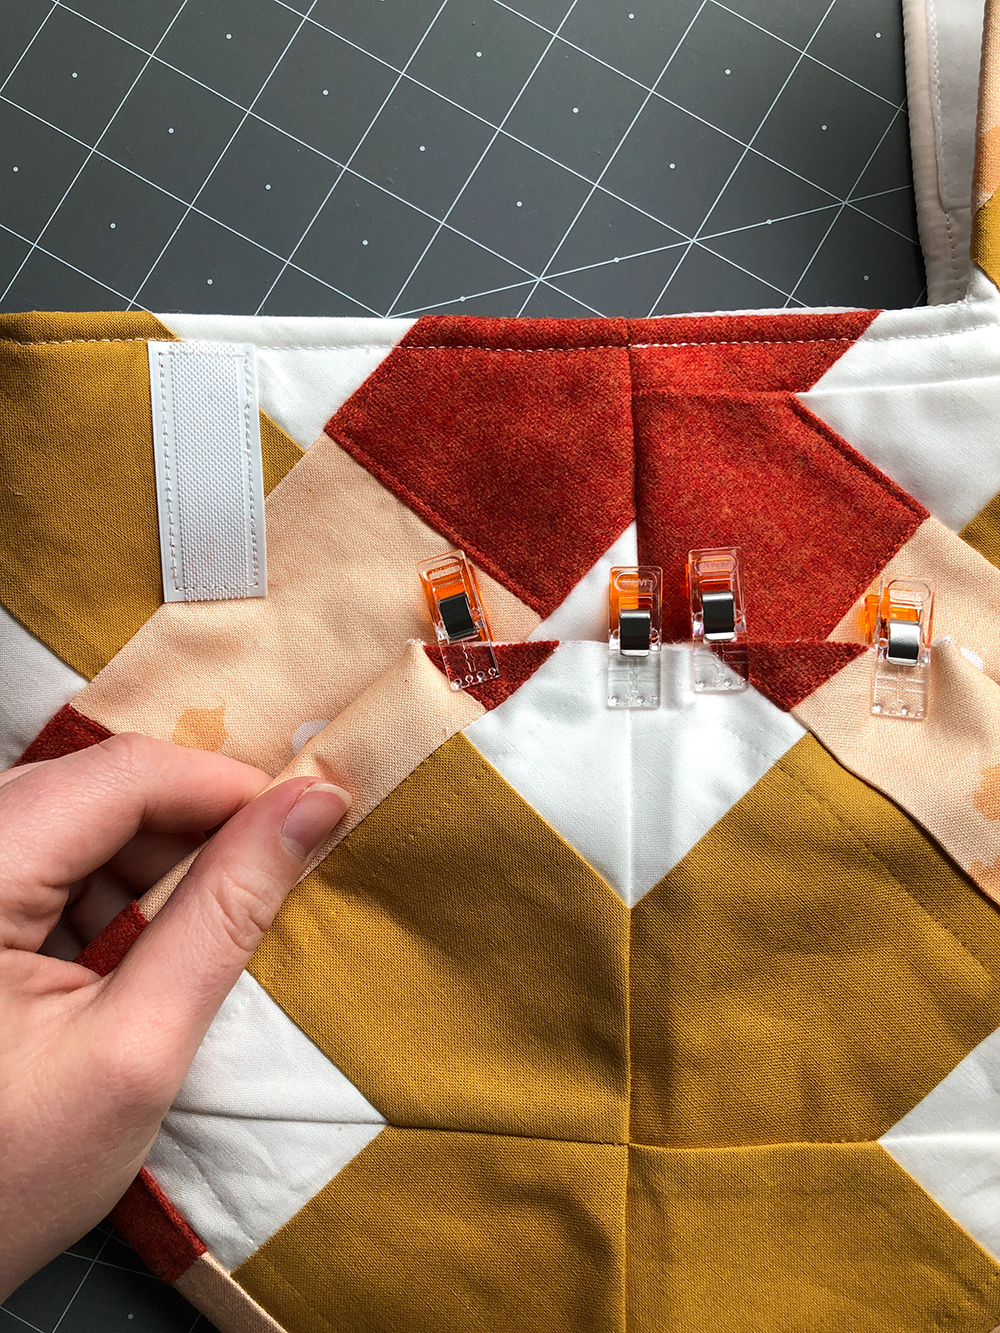 A step by step photo tutorial with all the information you need to make a quilted lunch bag with the Suzy Quilts Kris Kross pattern. Read about materials you'll need, how to use the Kris Kross pattern, and see every step for making your own quilted lunch bag. suzyquilts.com #quilting #sewingdiy